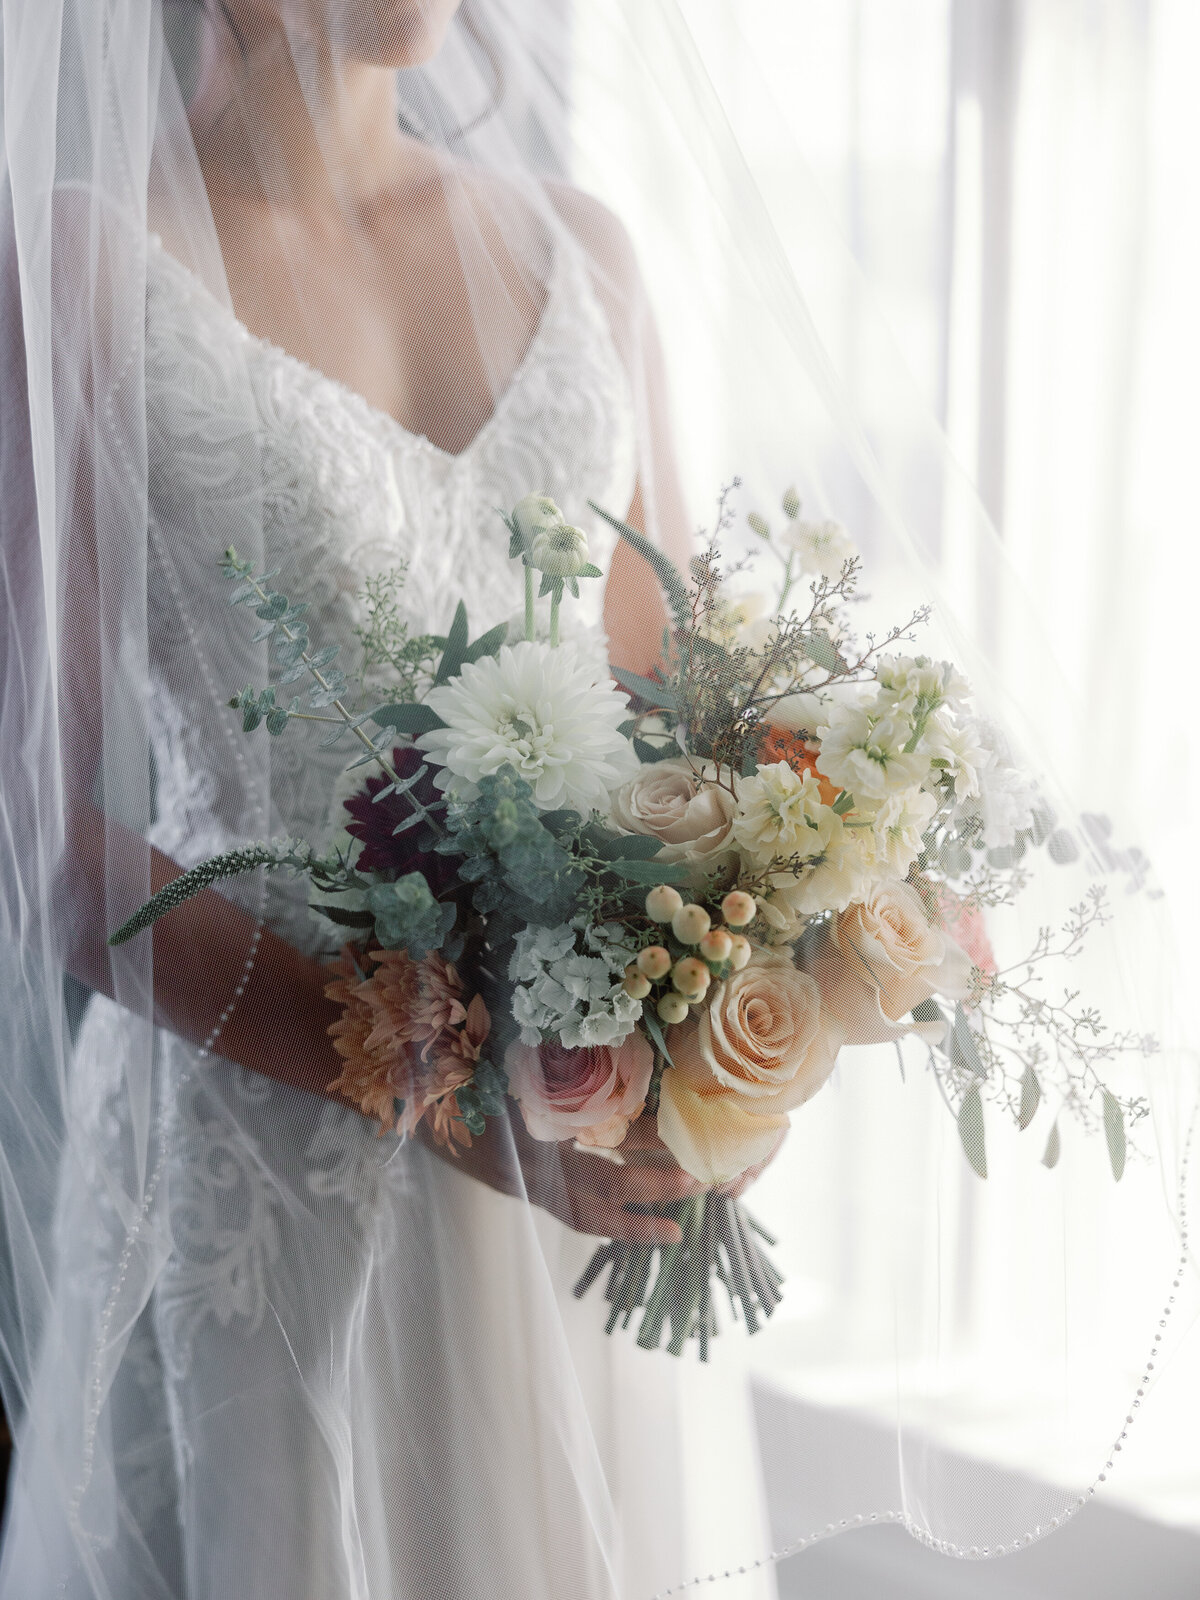 A bride holds her bouquet of summer flowers as her veil cascades over her body